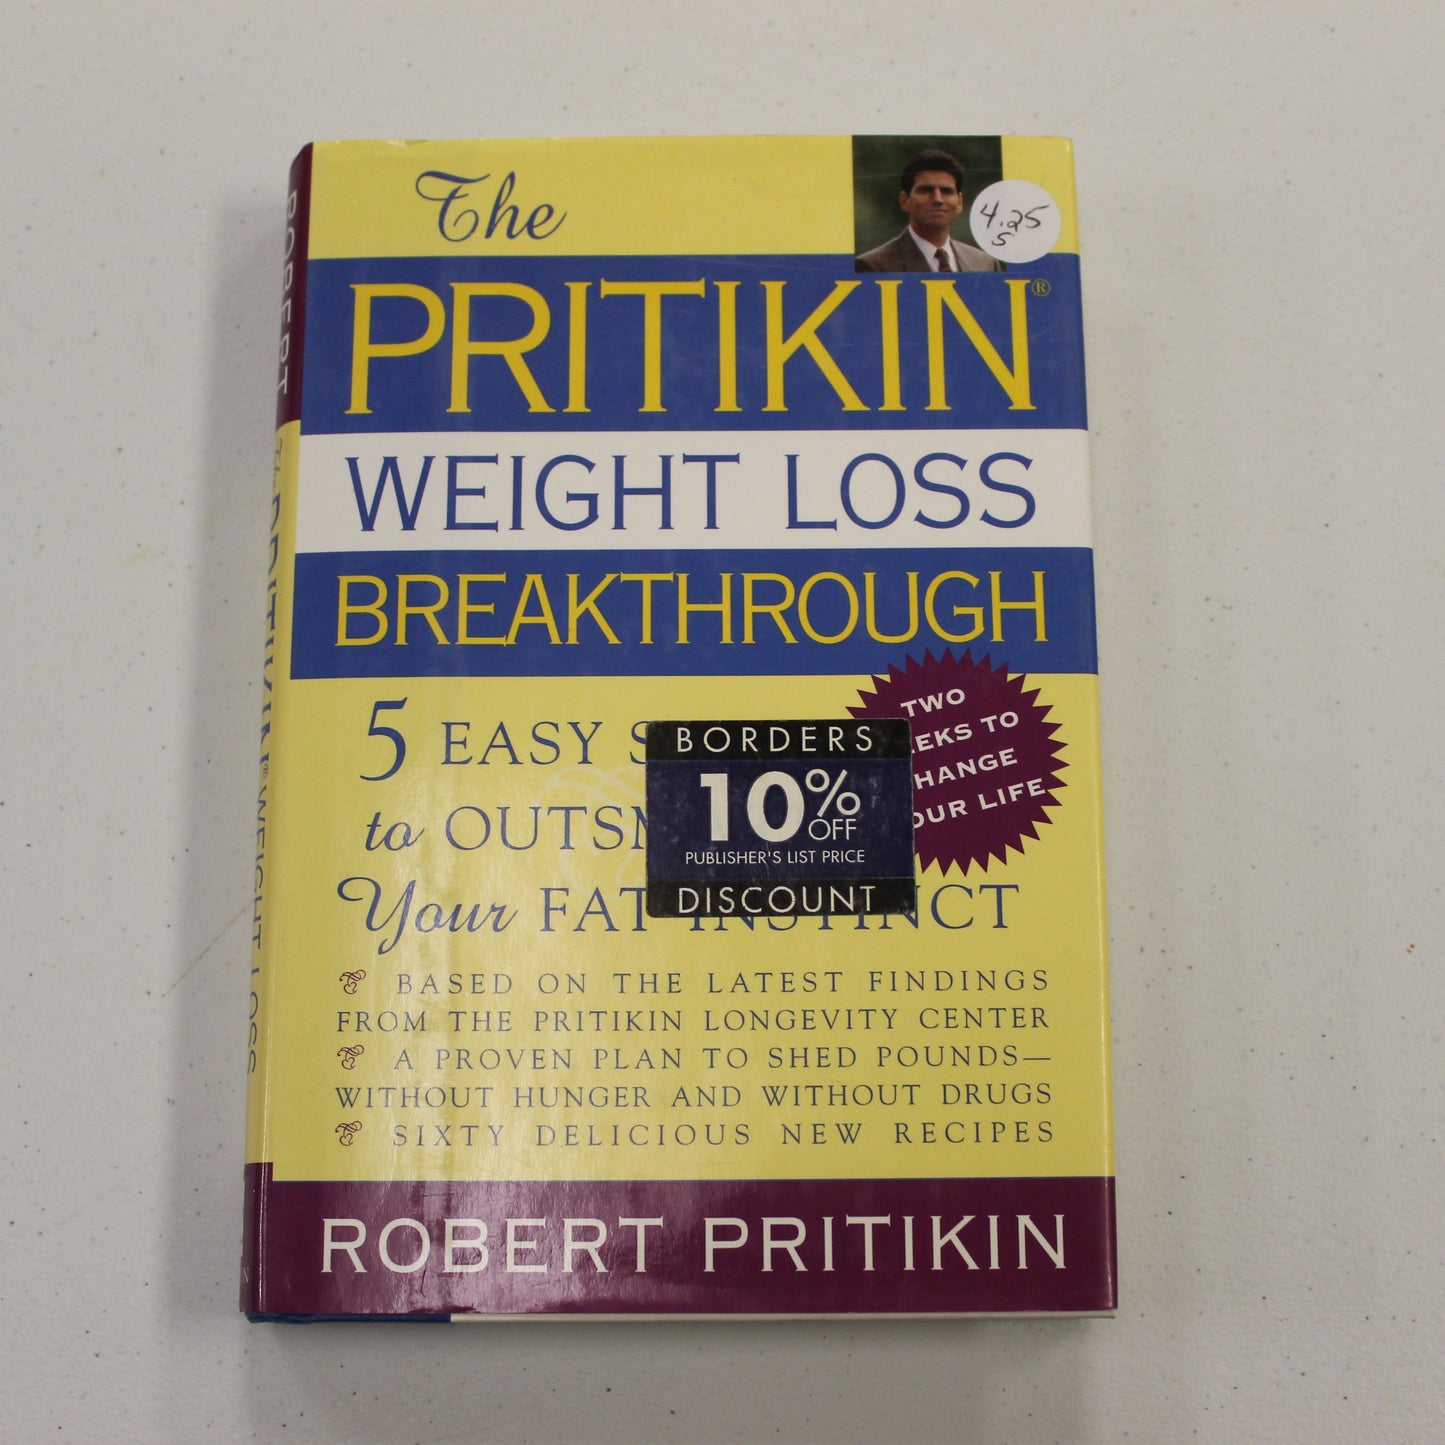 THE PRITIKIN WEIGHT LOSS BREAKTHROUGH